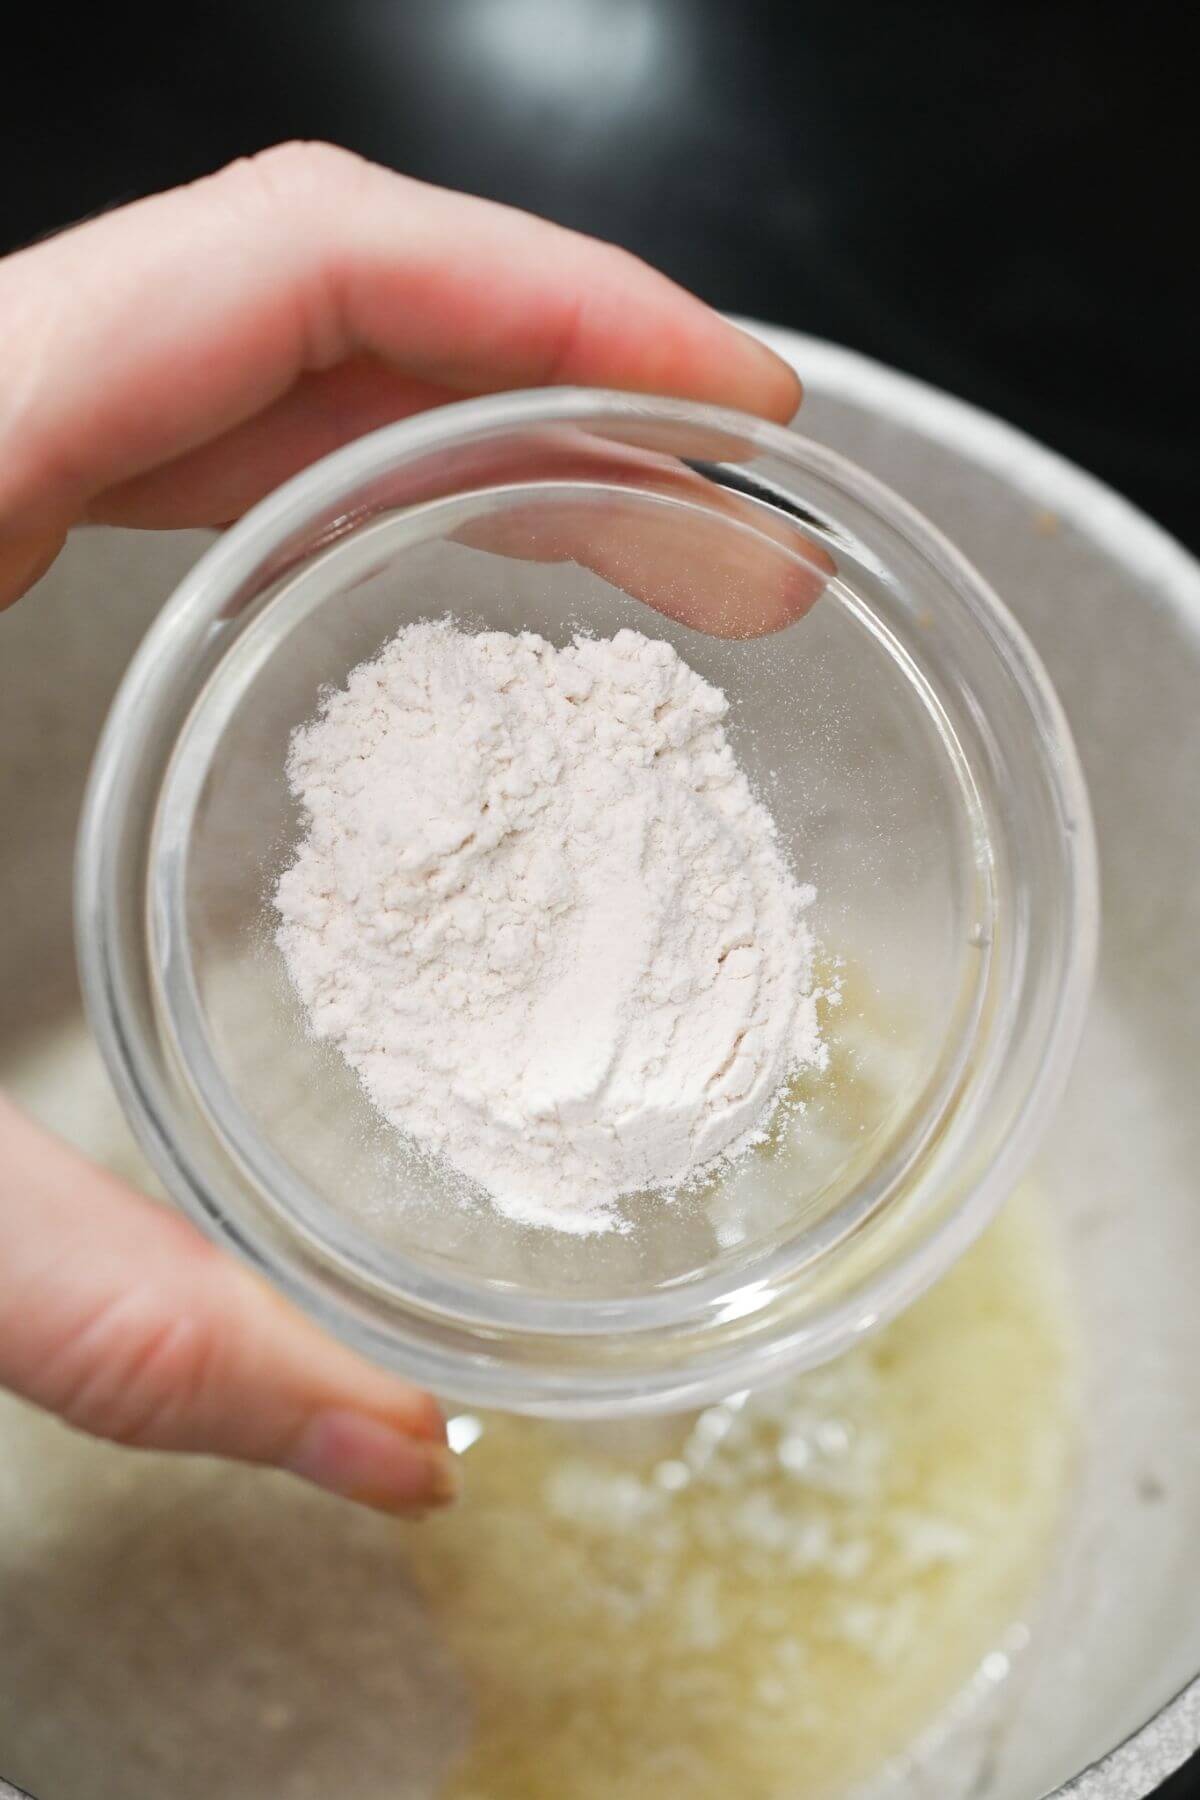 A person holding a bowl of flour over melted butter.